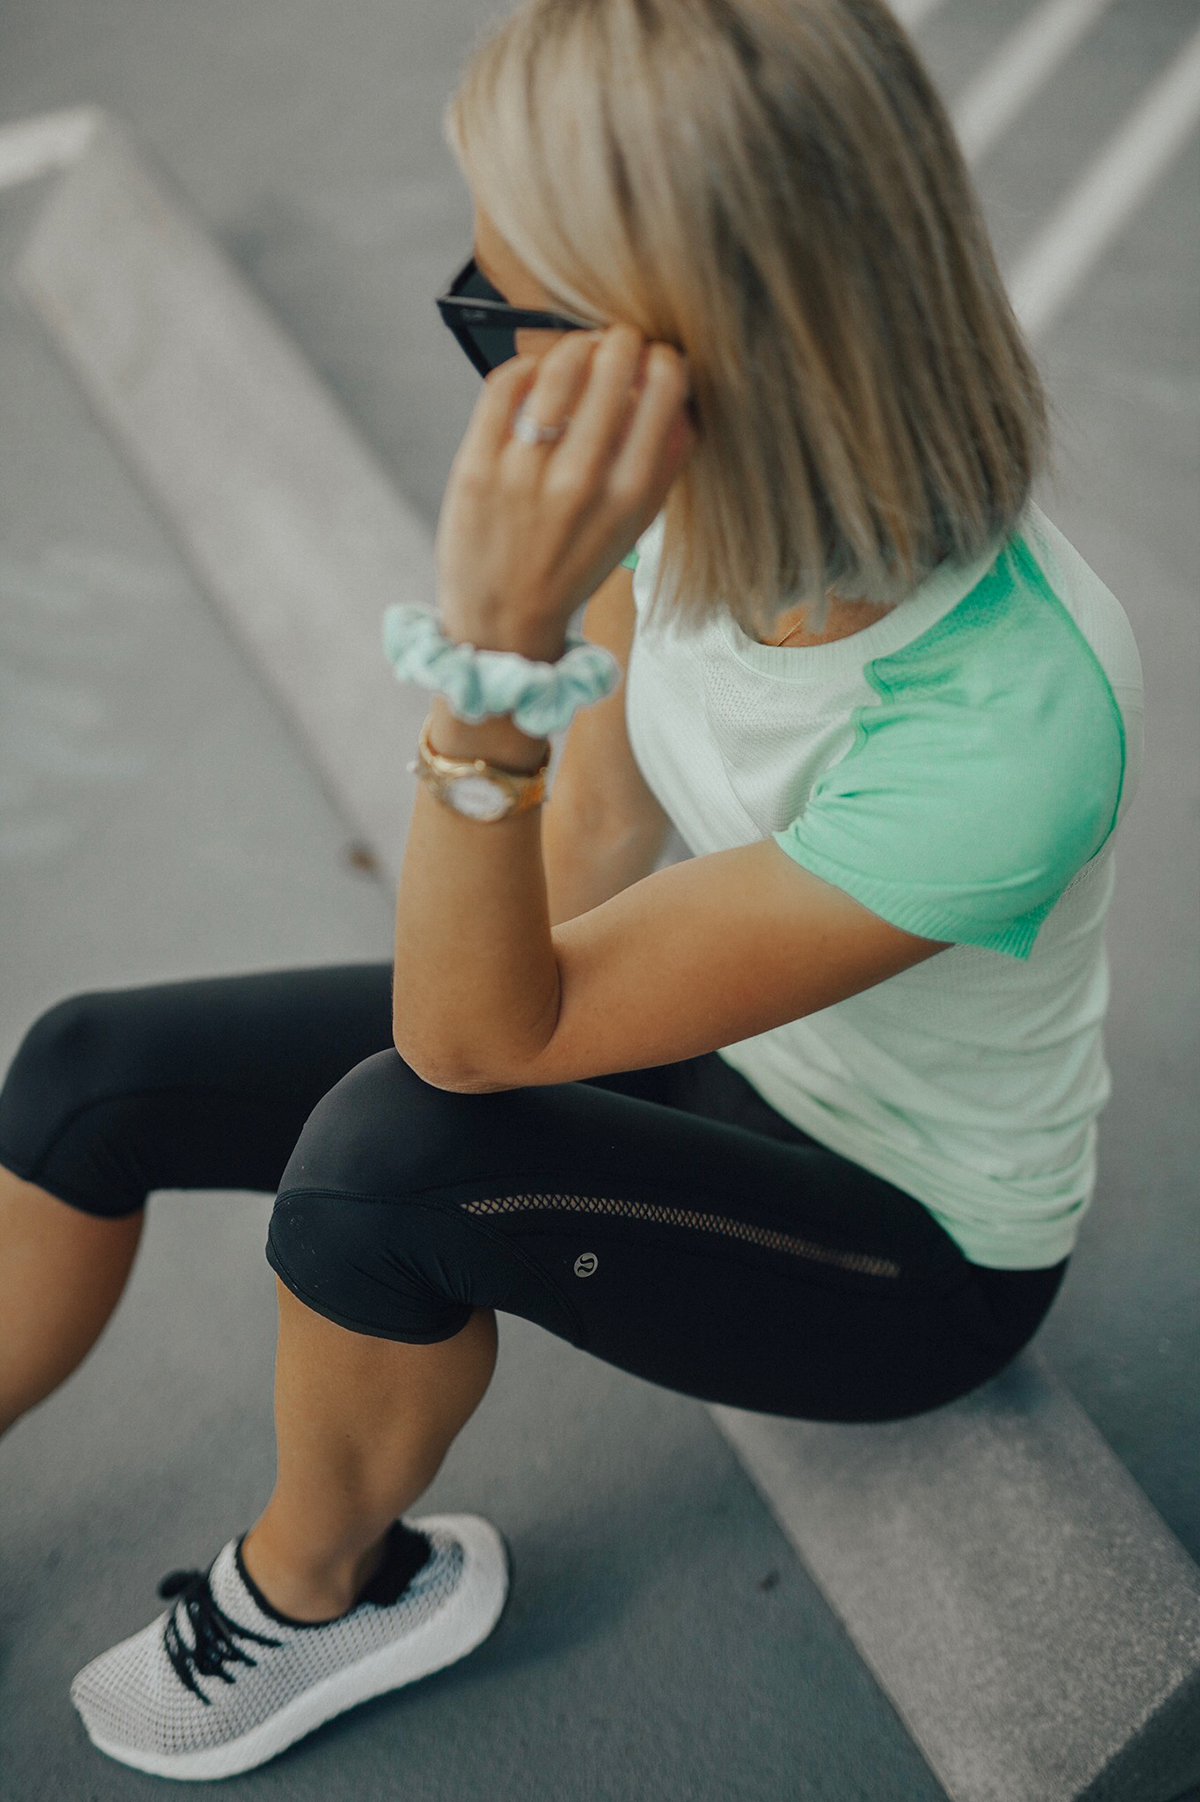 a discounted Lululemon workout outfit from thredUP